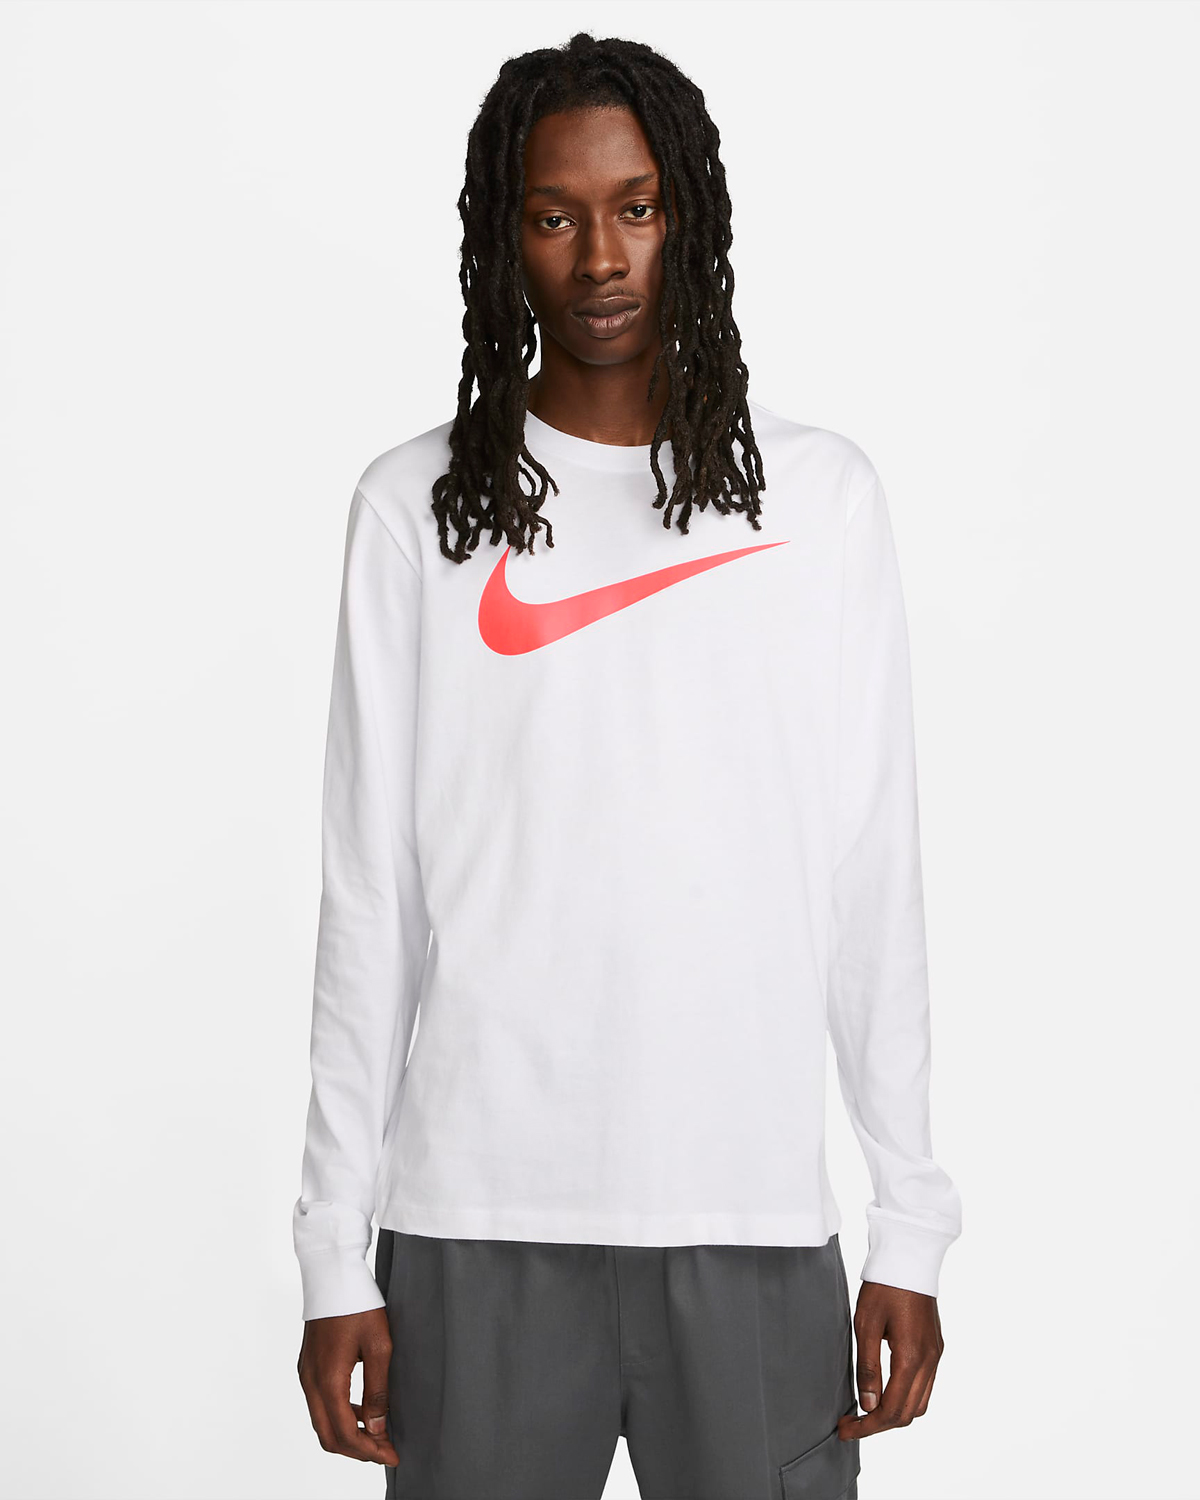 Nike-Sportswear-Long-Sleeve-T-Shirt-White-Picante-Red-1